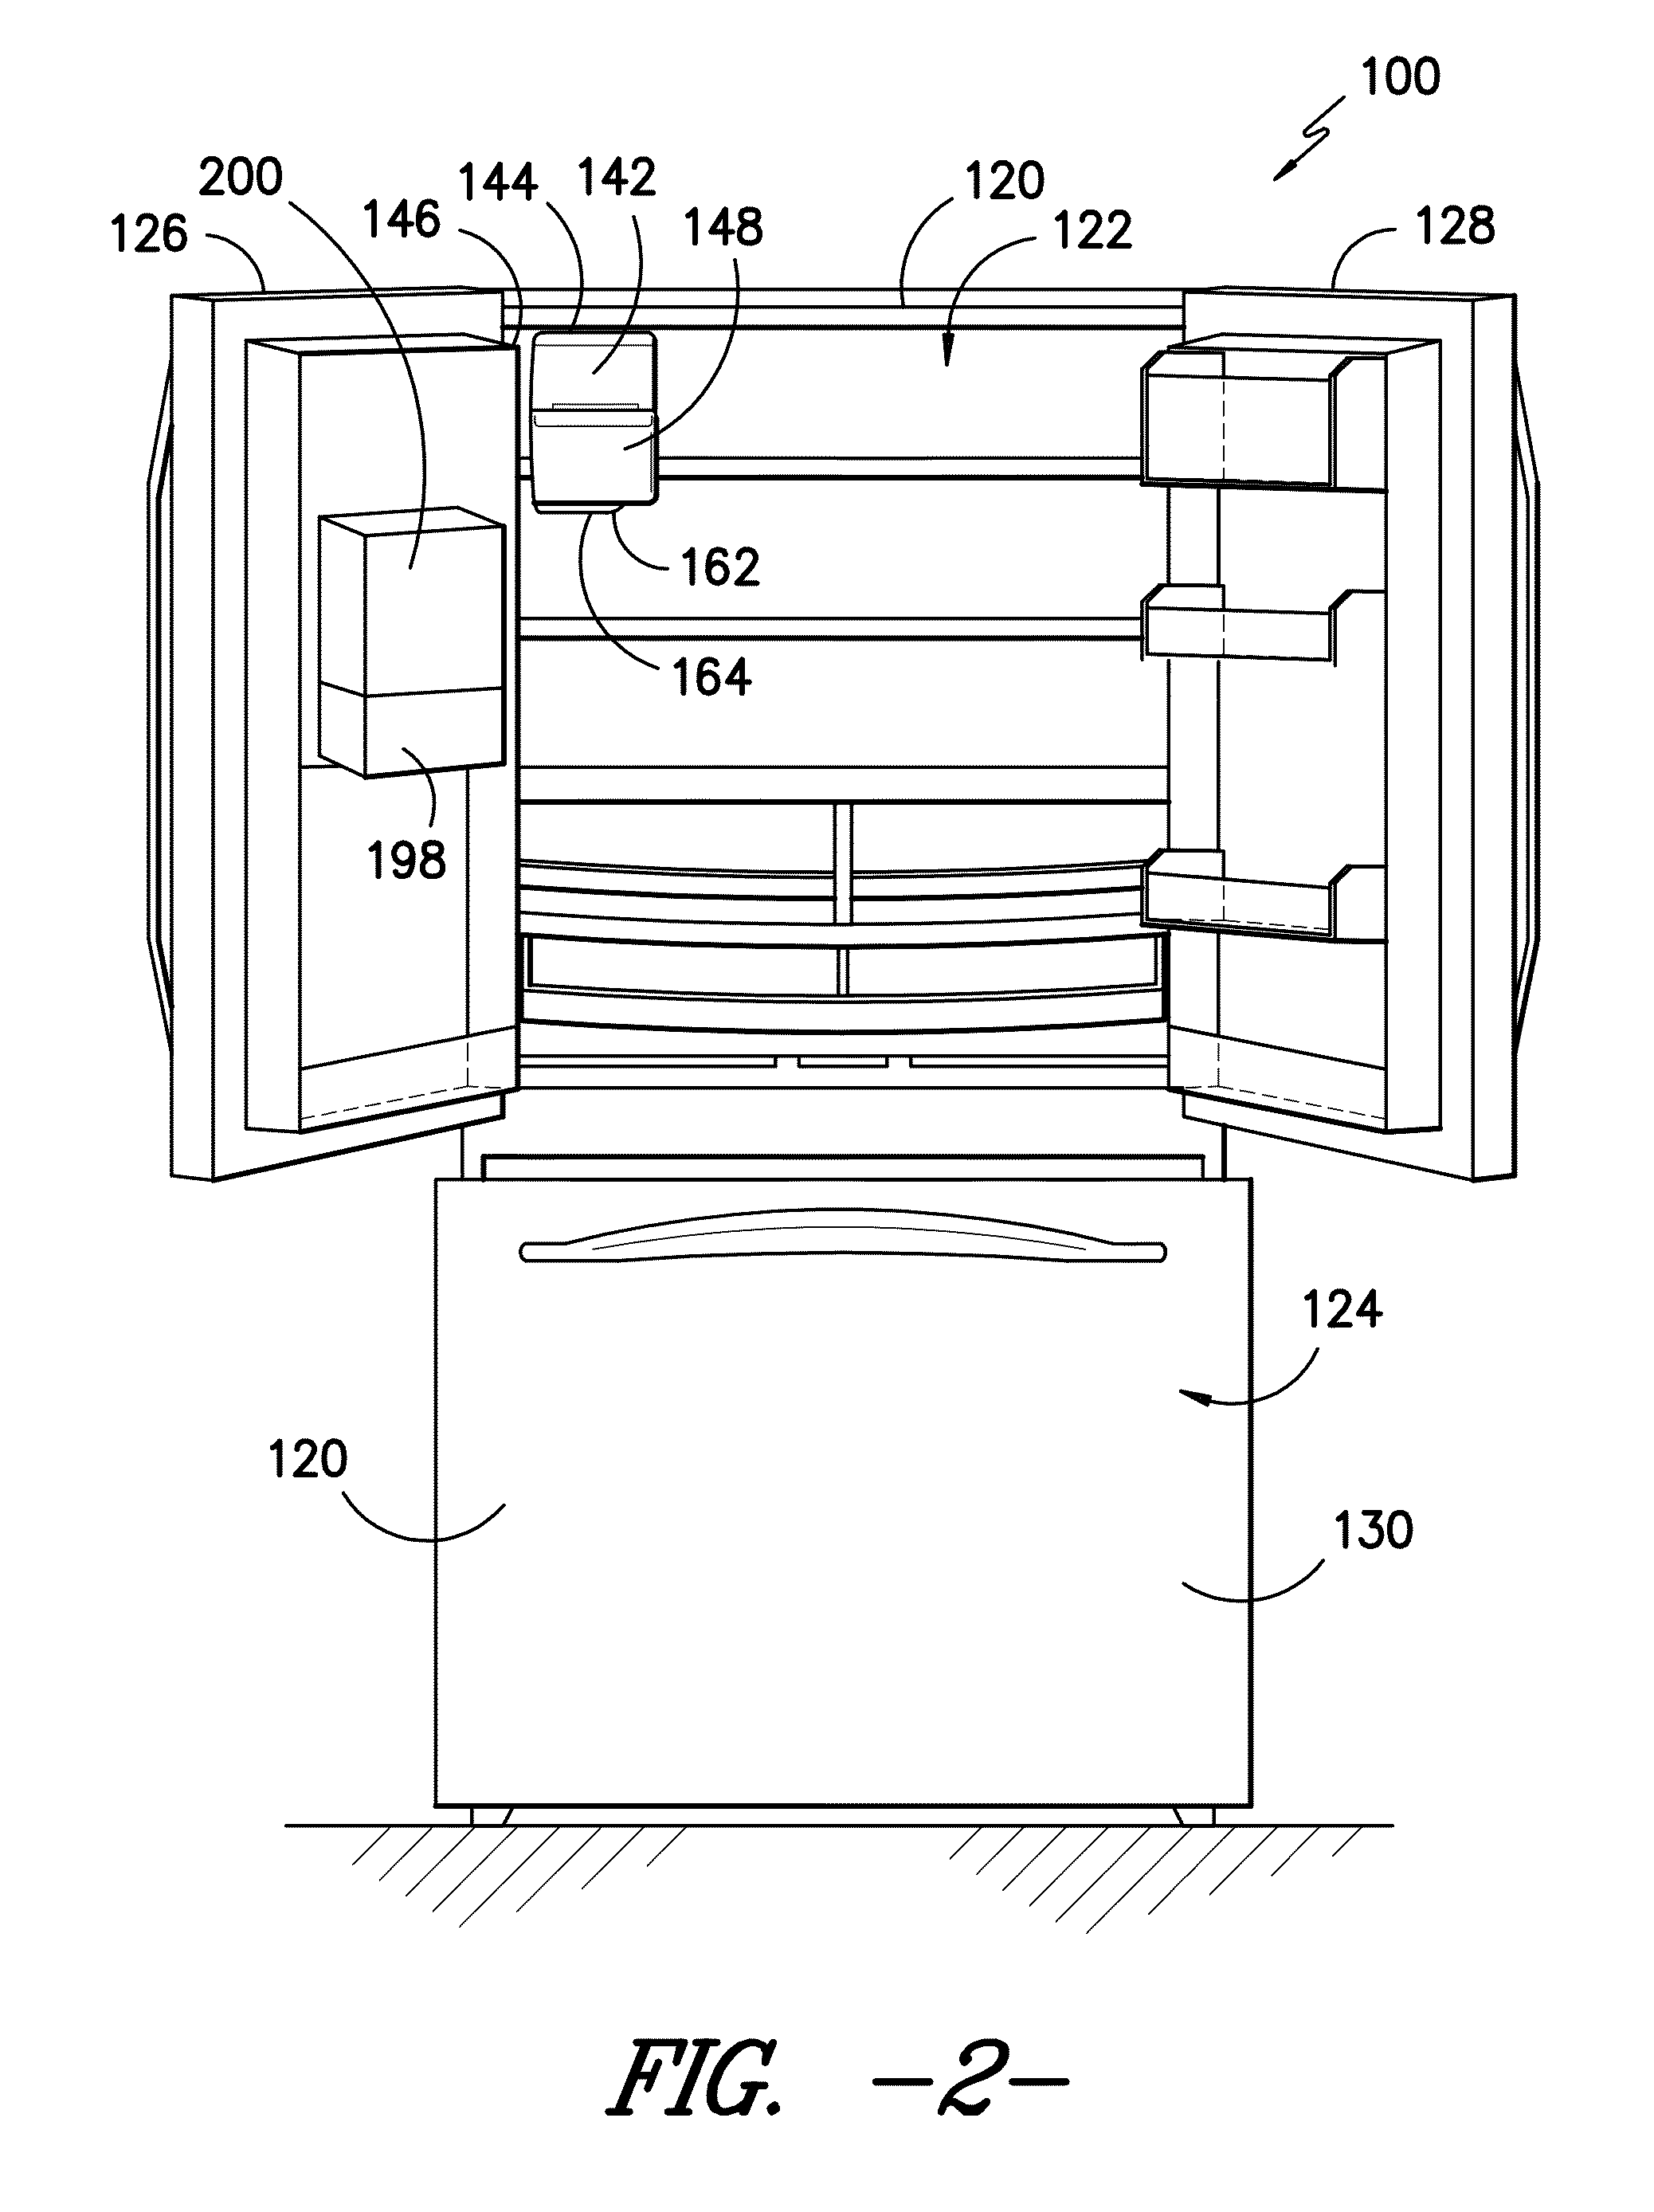 Ice dispenser with crusher for a refrigerator appliance